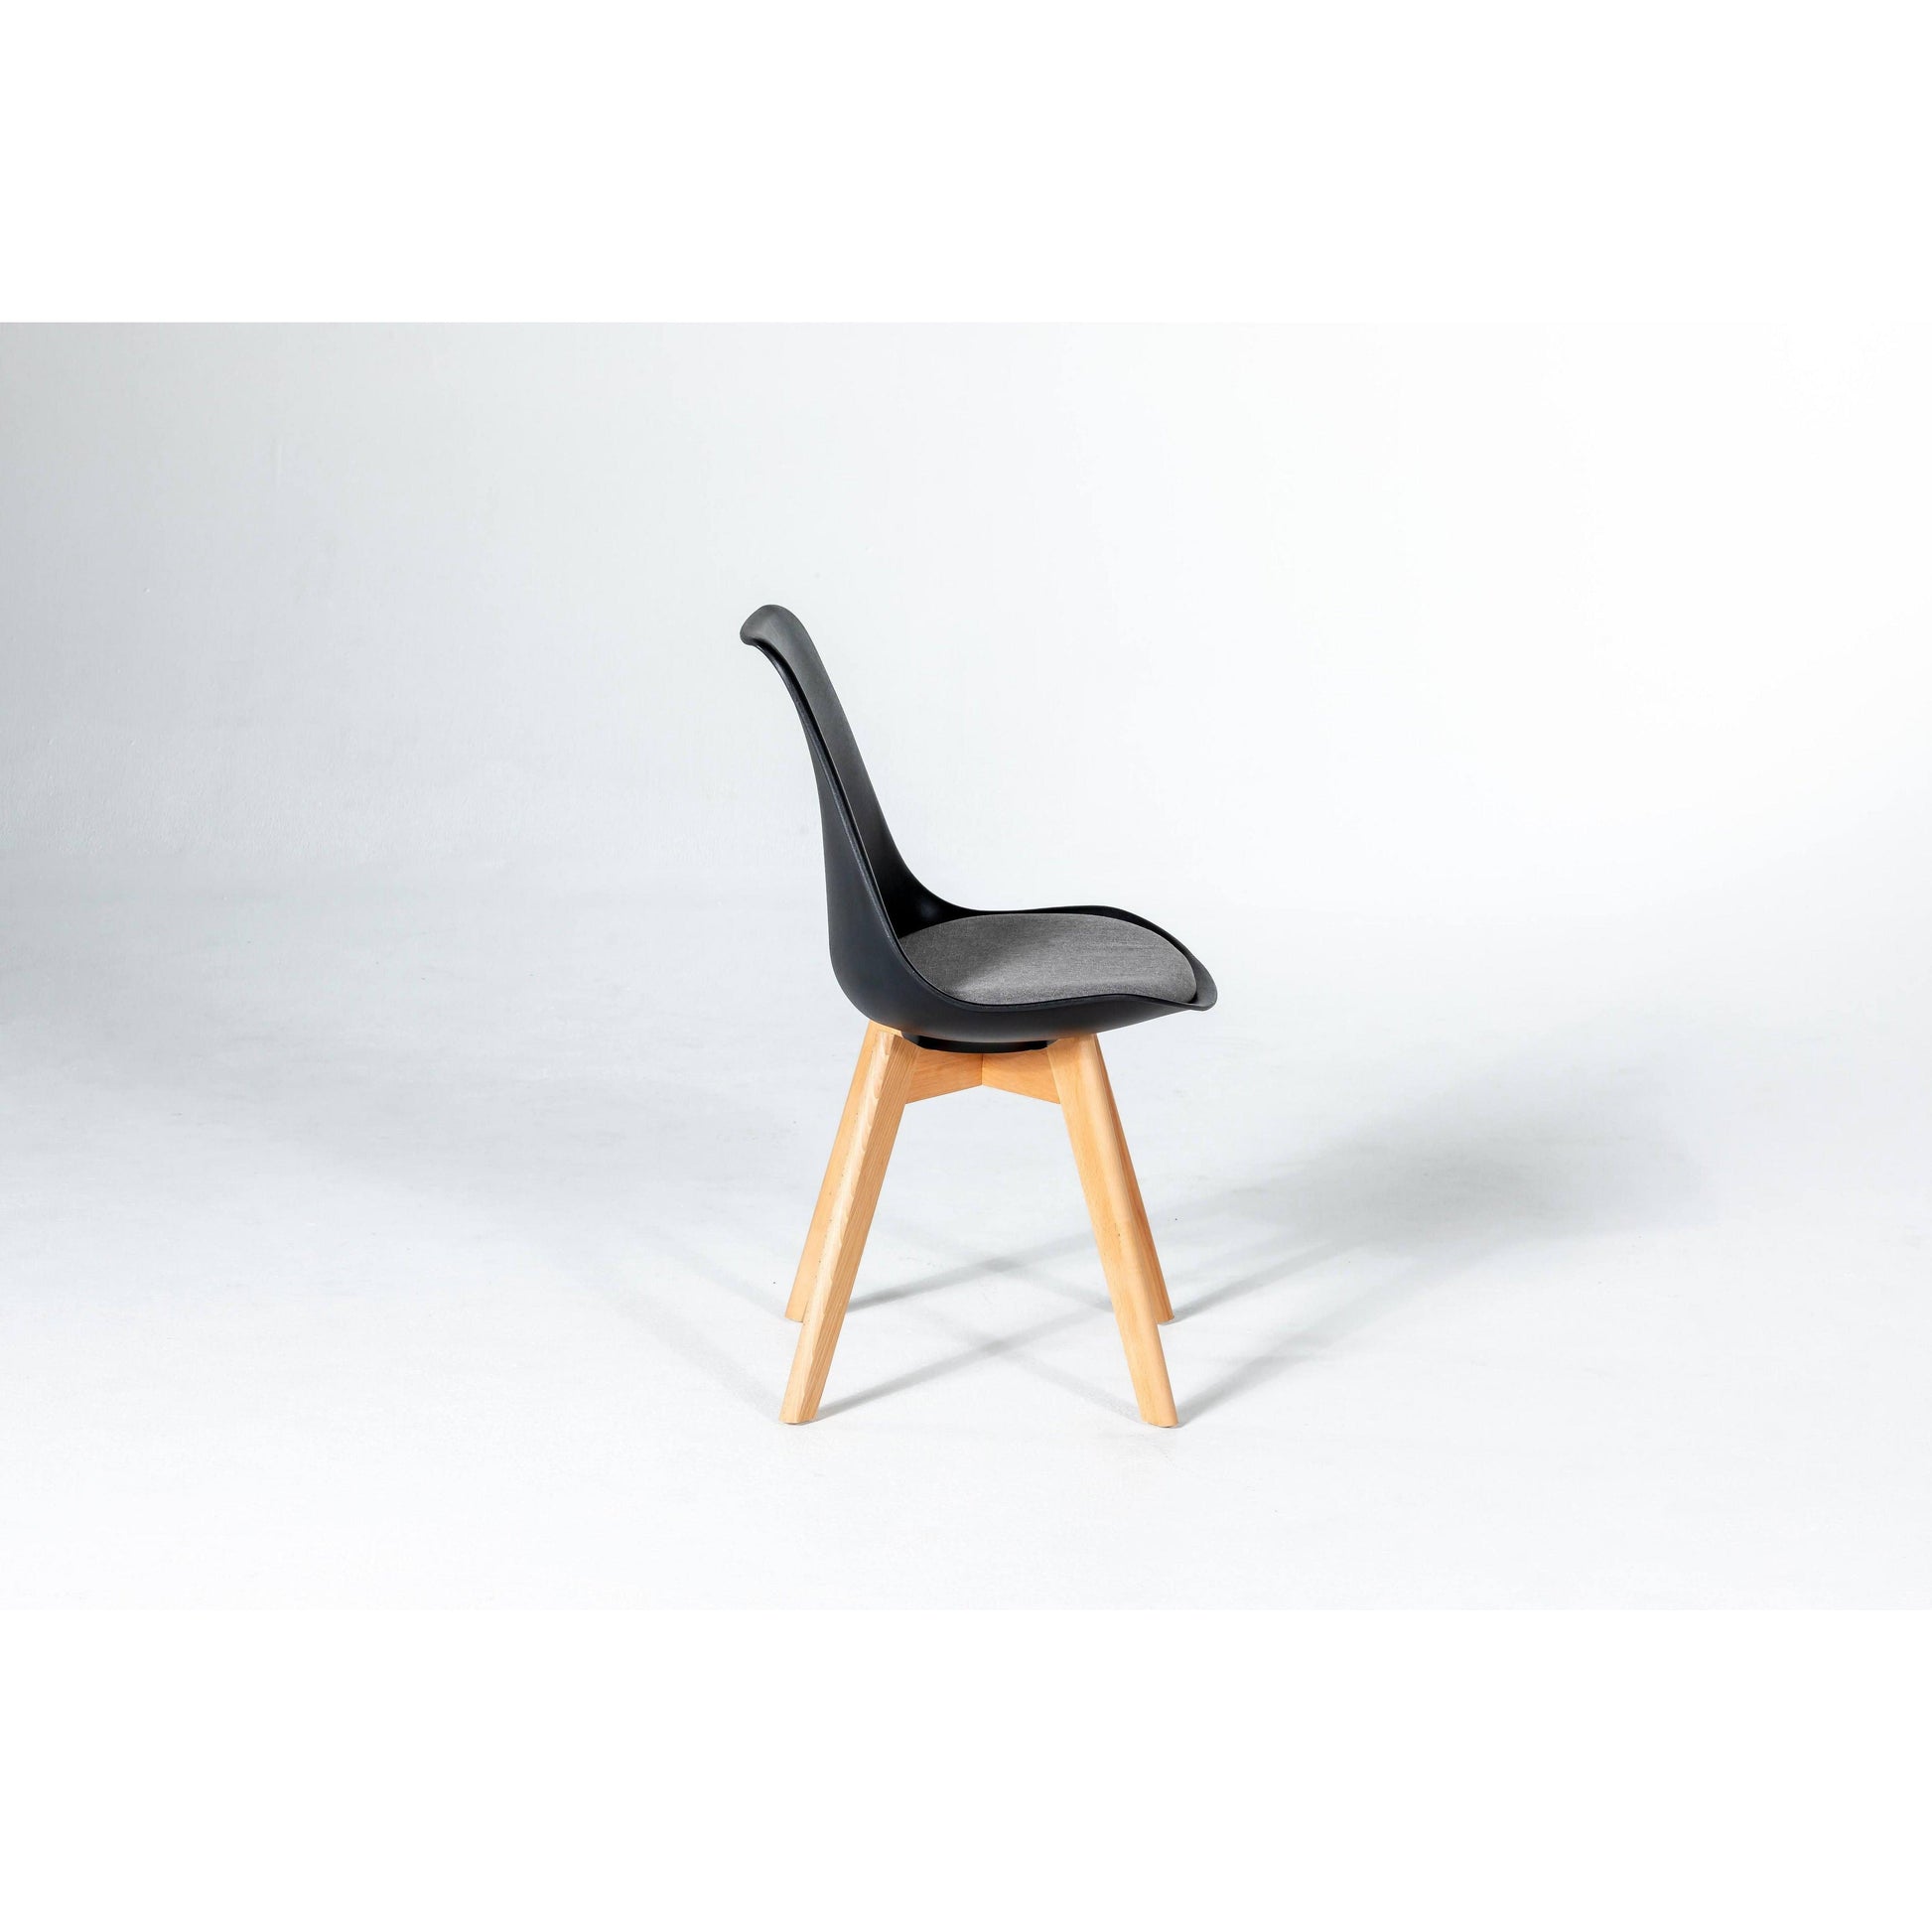 Virgo Visitor Chair - Office Furniture Company 